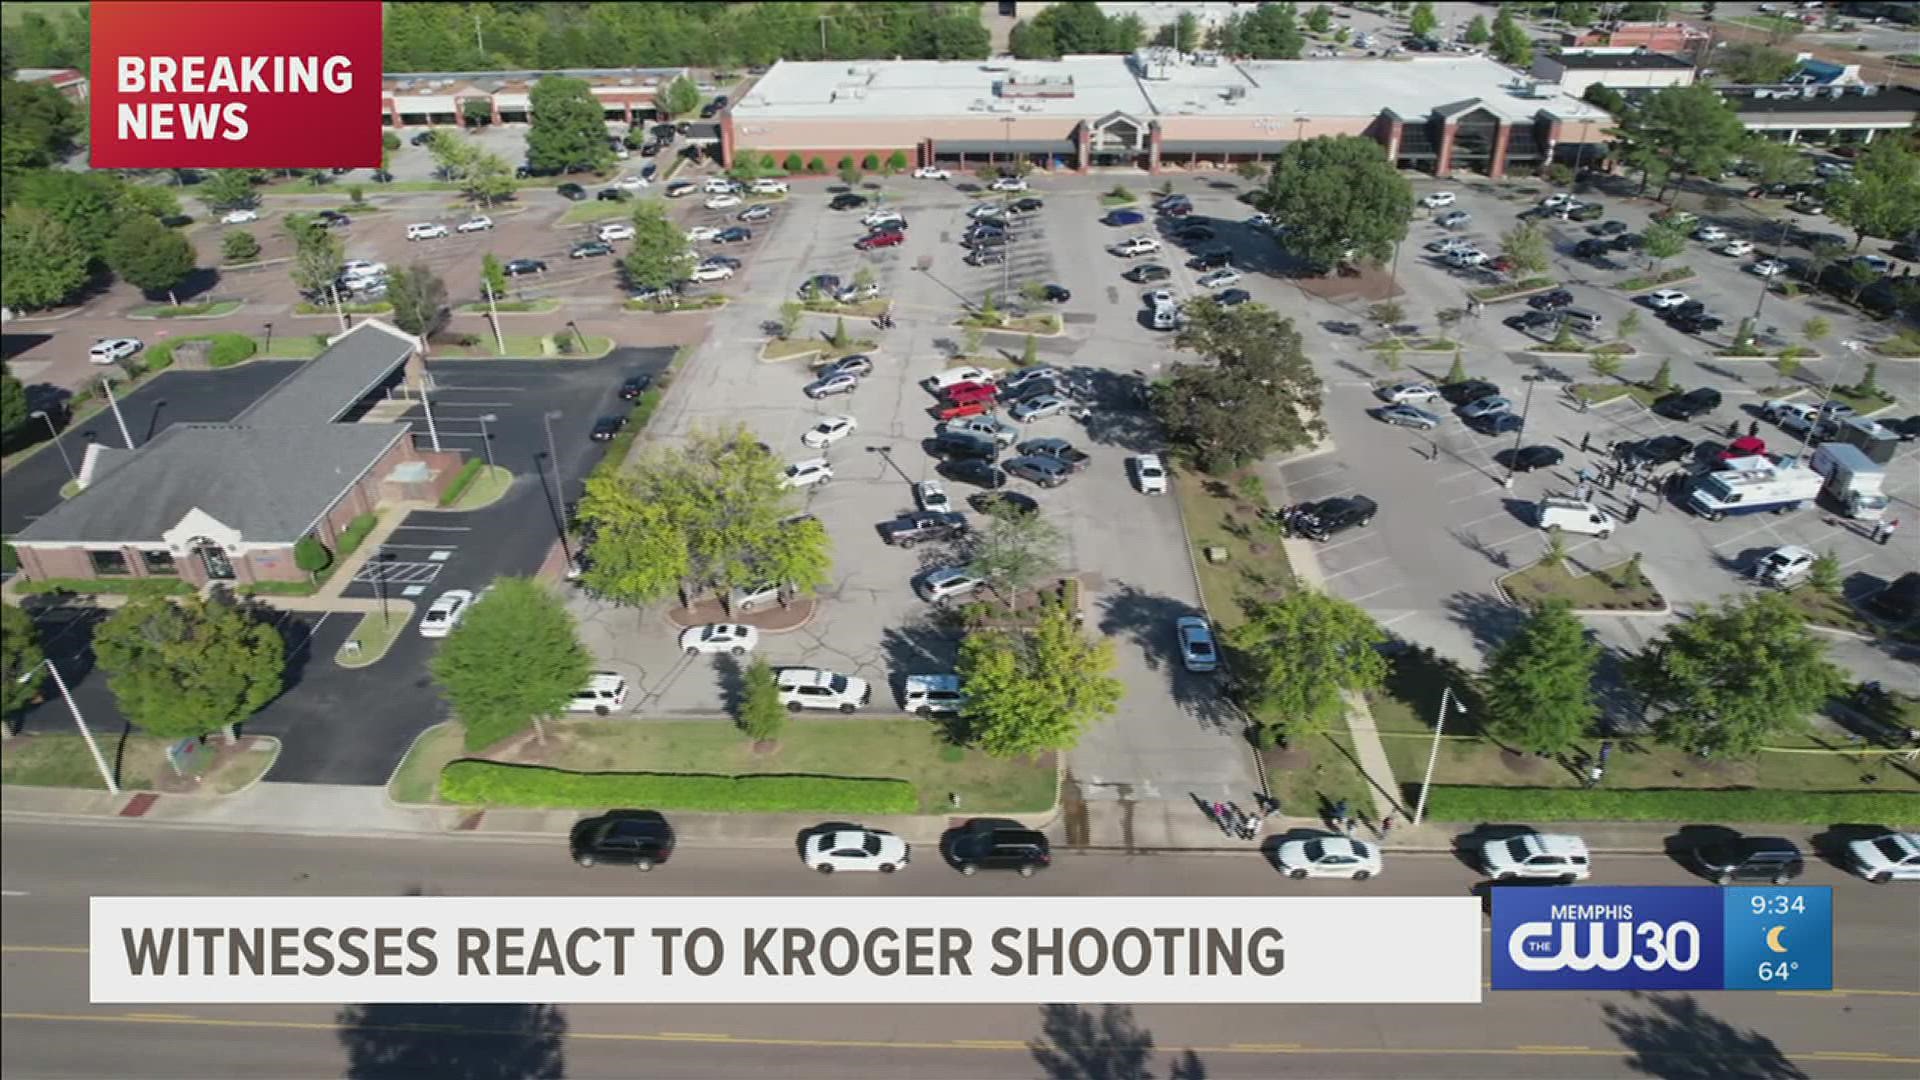 Employees describe what they saw in a mass shooting at Kroger in Collierville.